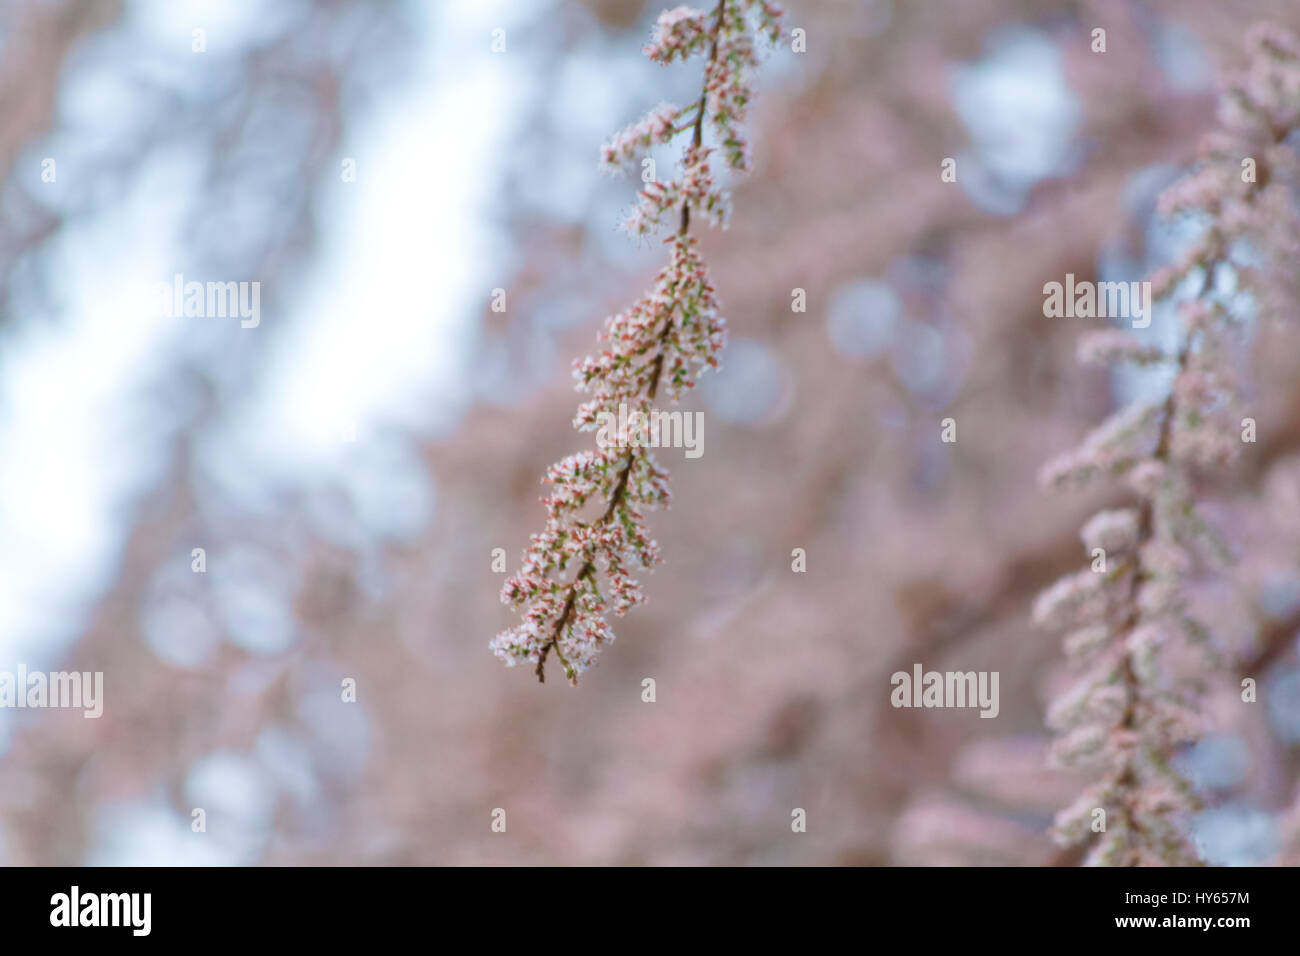 blurred texture of a Sakura bloomed branches Stock Photo